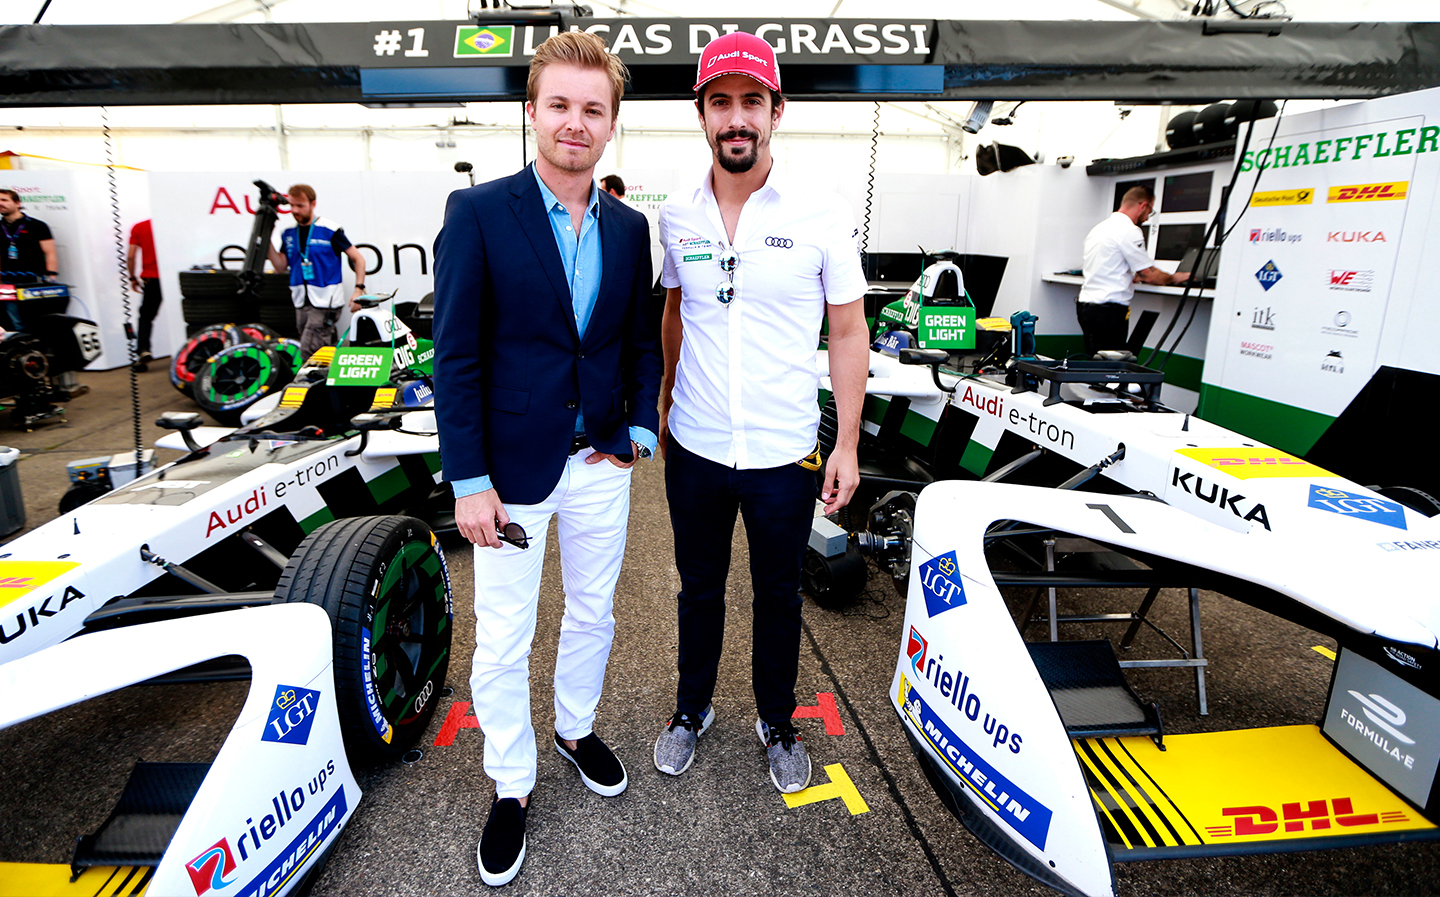 Drivin' with Nico Rosberg rally 2019 - feature by Times Luxx's David Green for Driving.co.uk - Rosberg with Lucas di Grassi at Formula E 